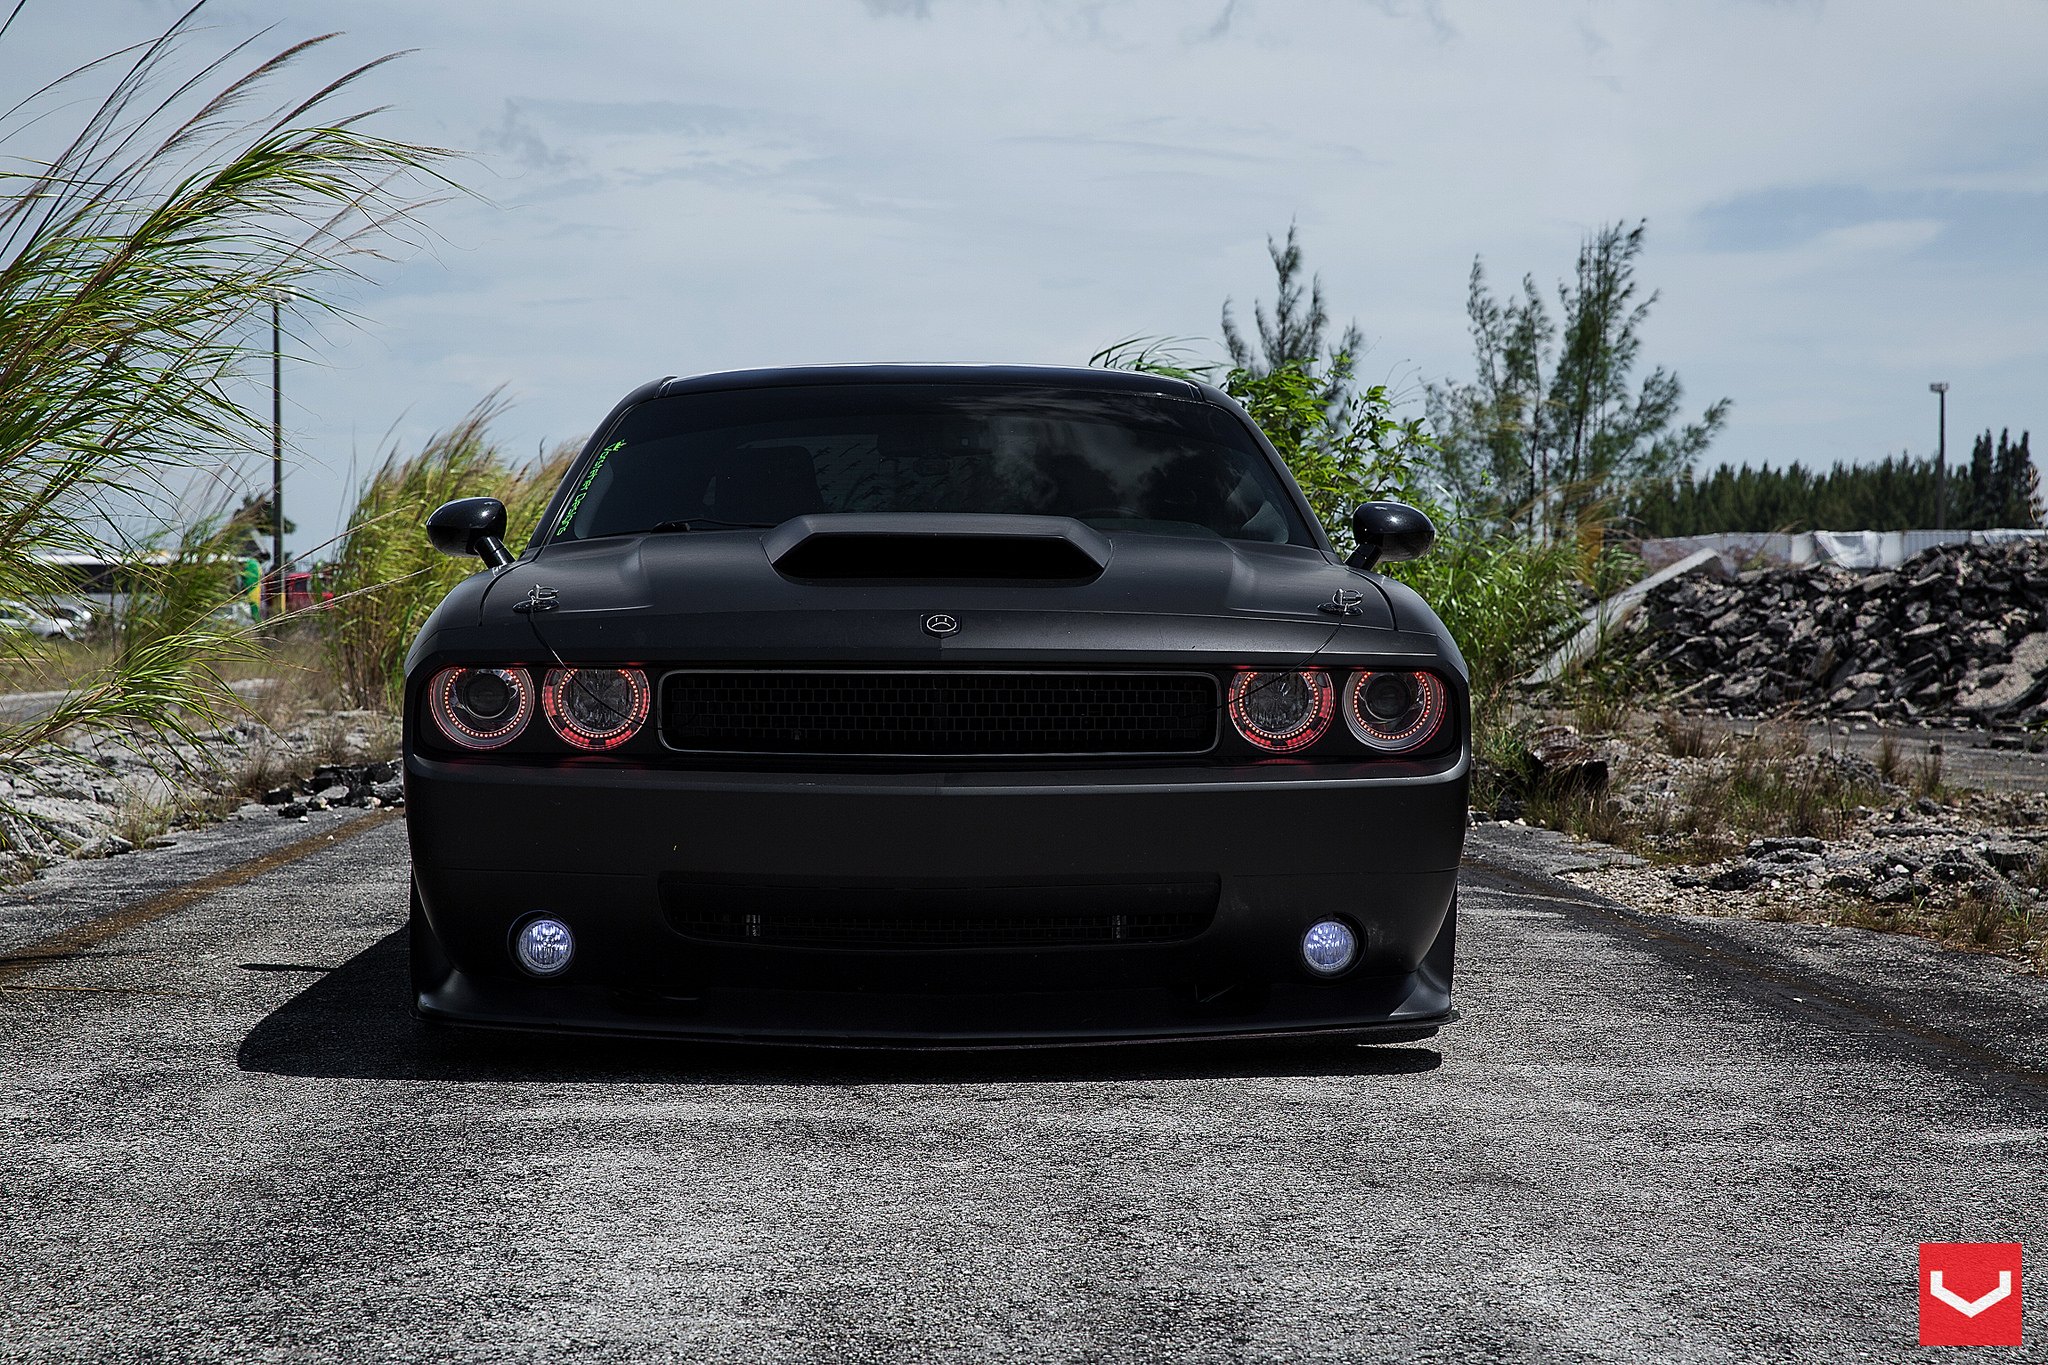 Dodge Challenger With Red Oracle Halo Headlights - Photo by Vossen